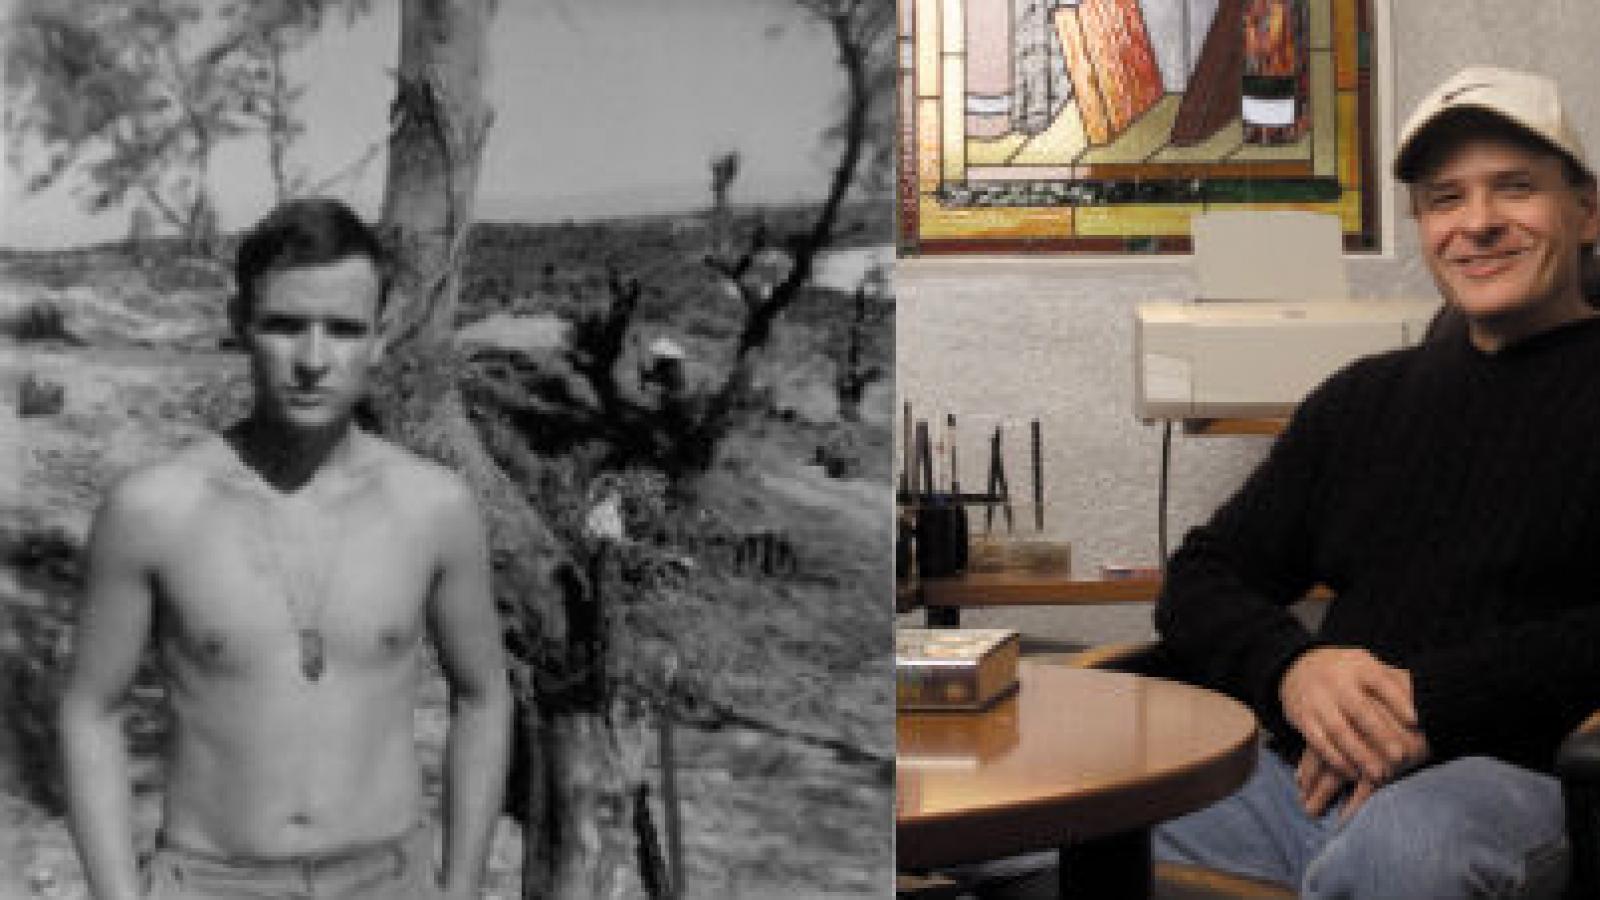 Tim O'Brien, (l) in Vietnam and (r) today. Both photos courtesy of the author